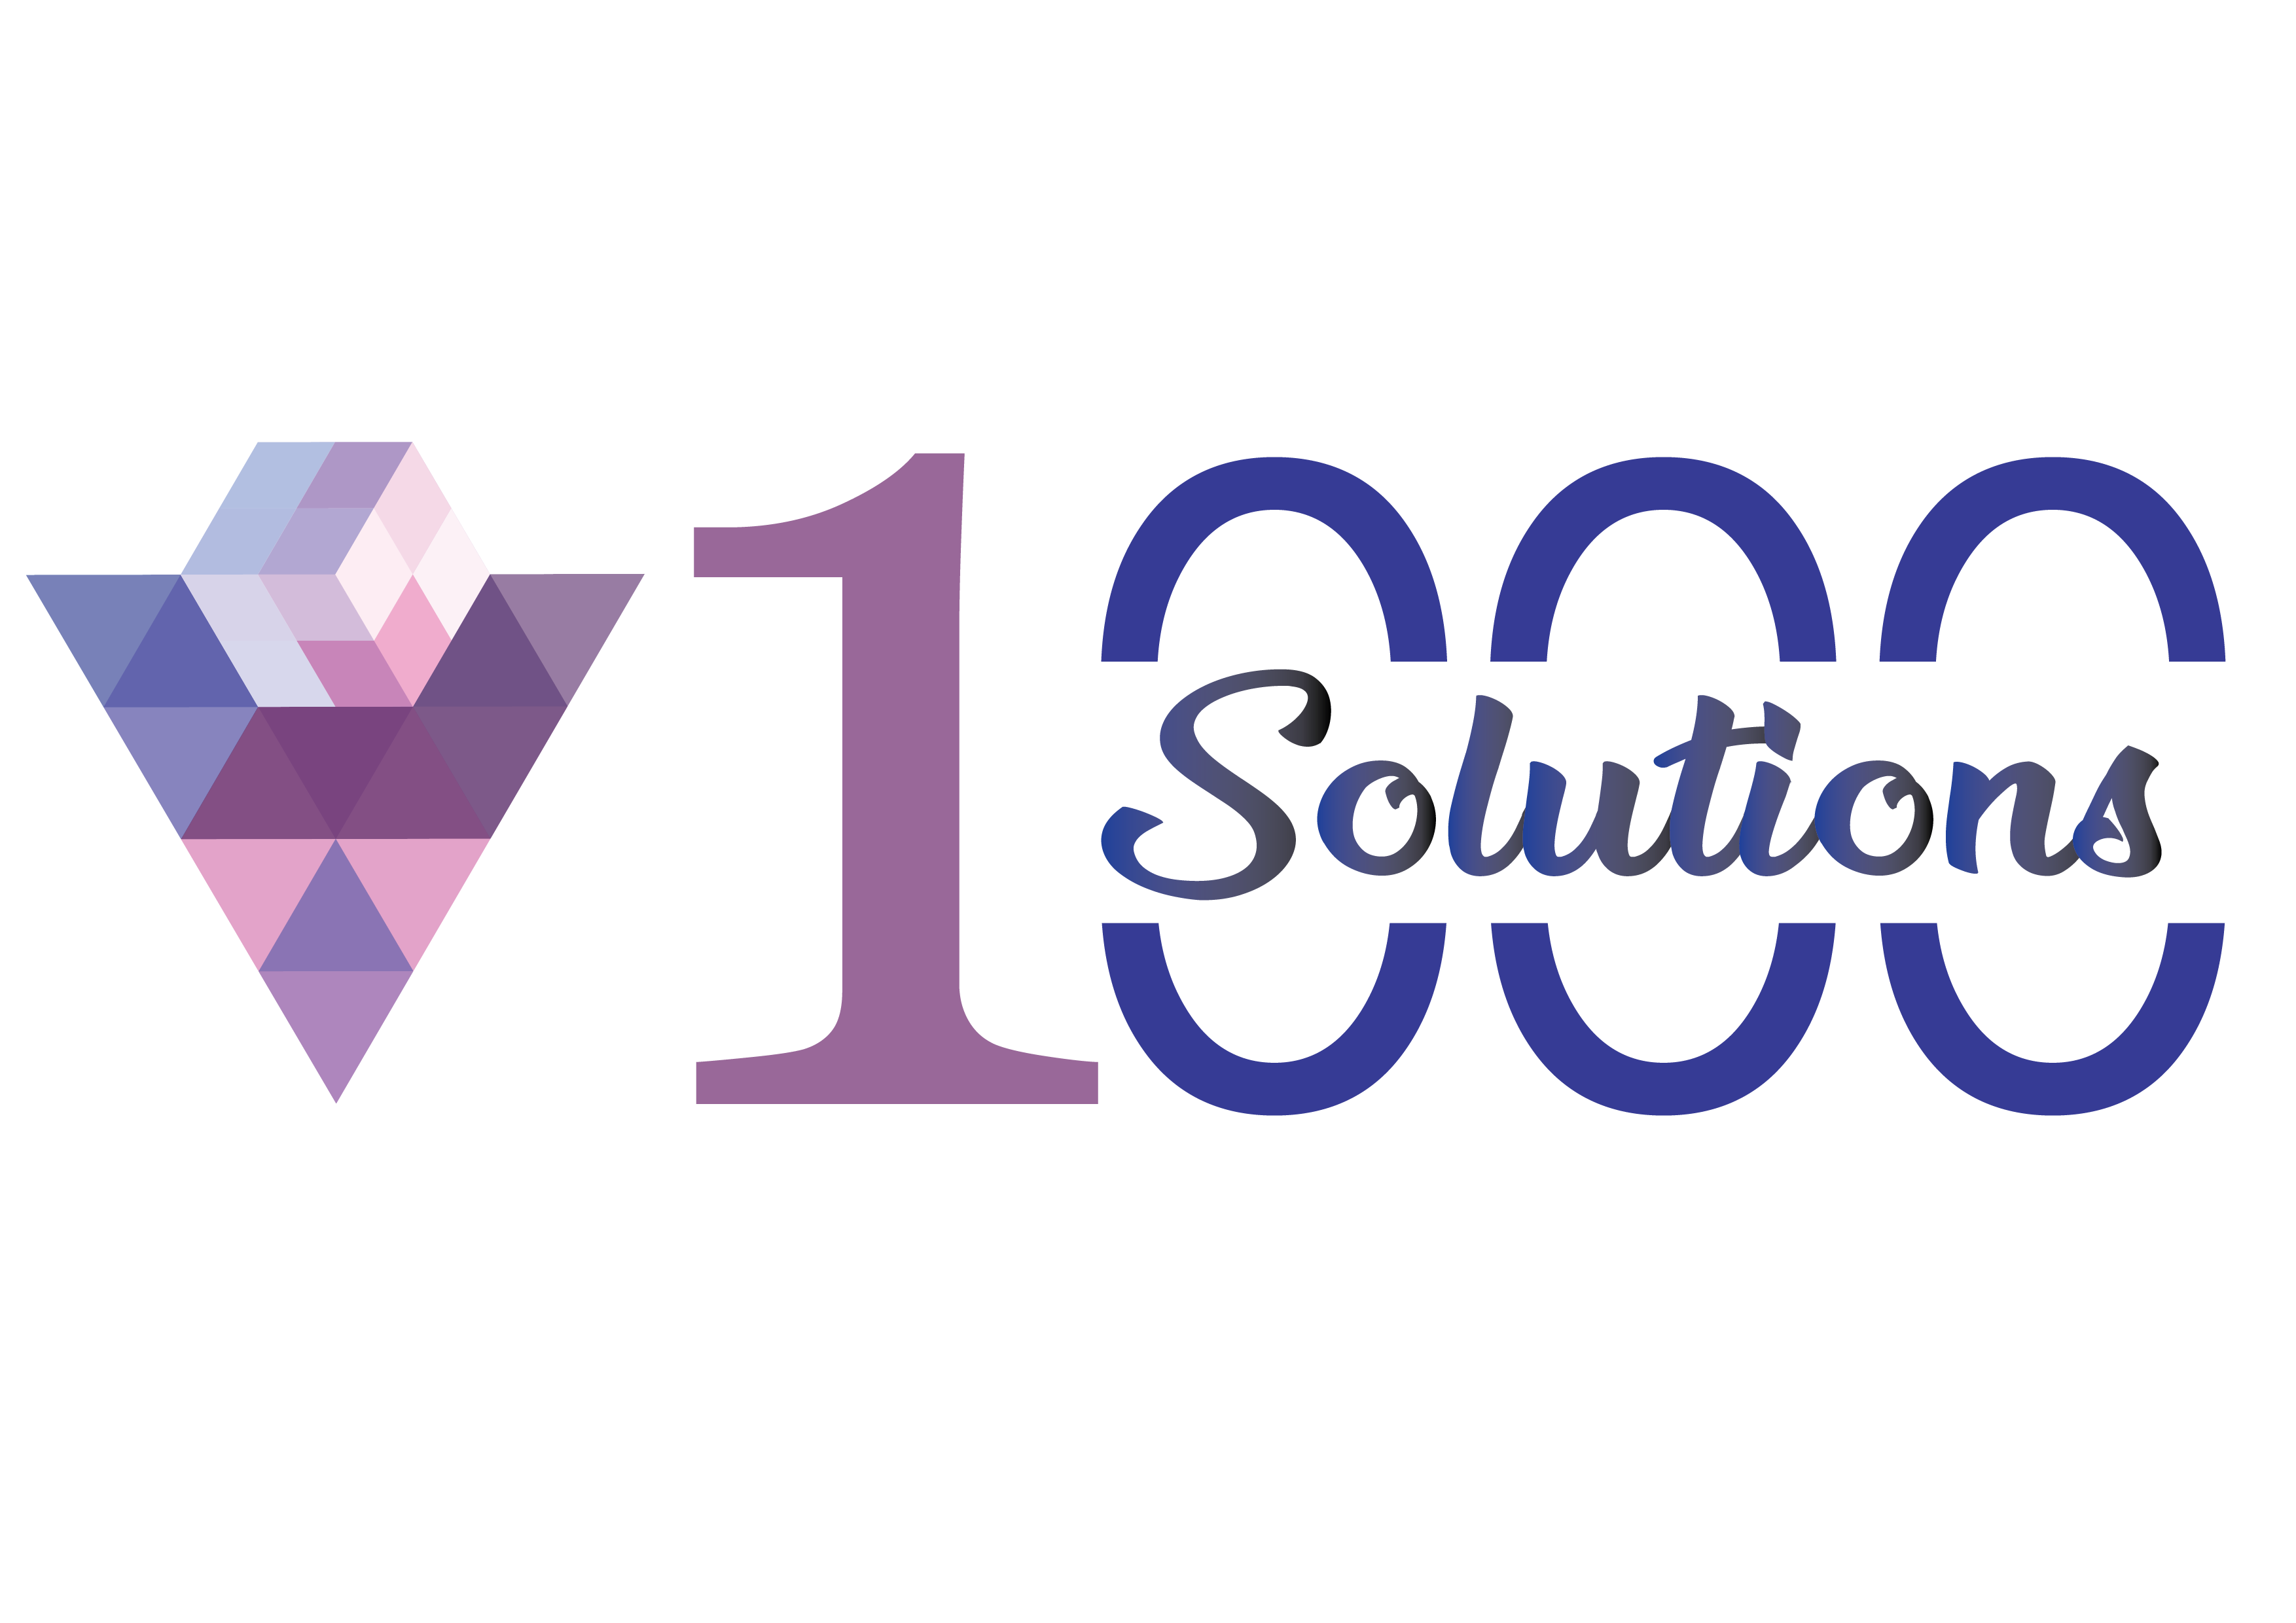 1000solutions | Bring Business Online with US 